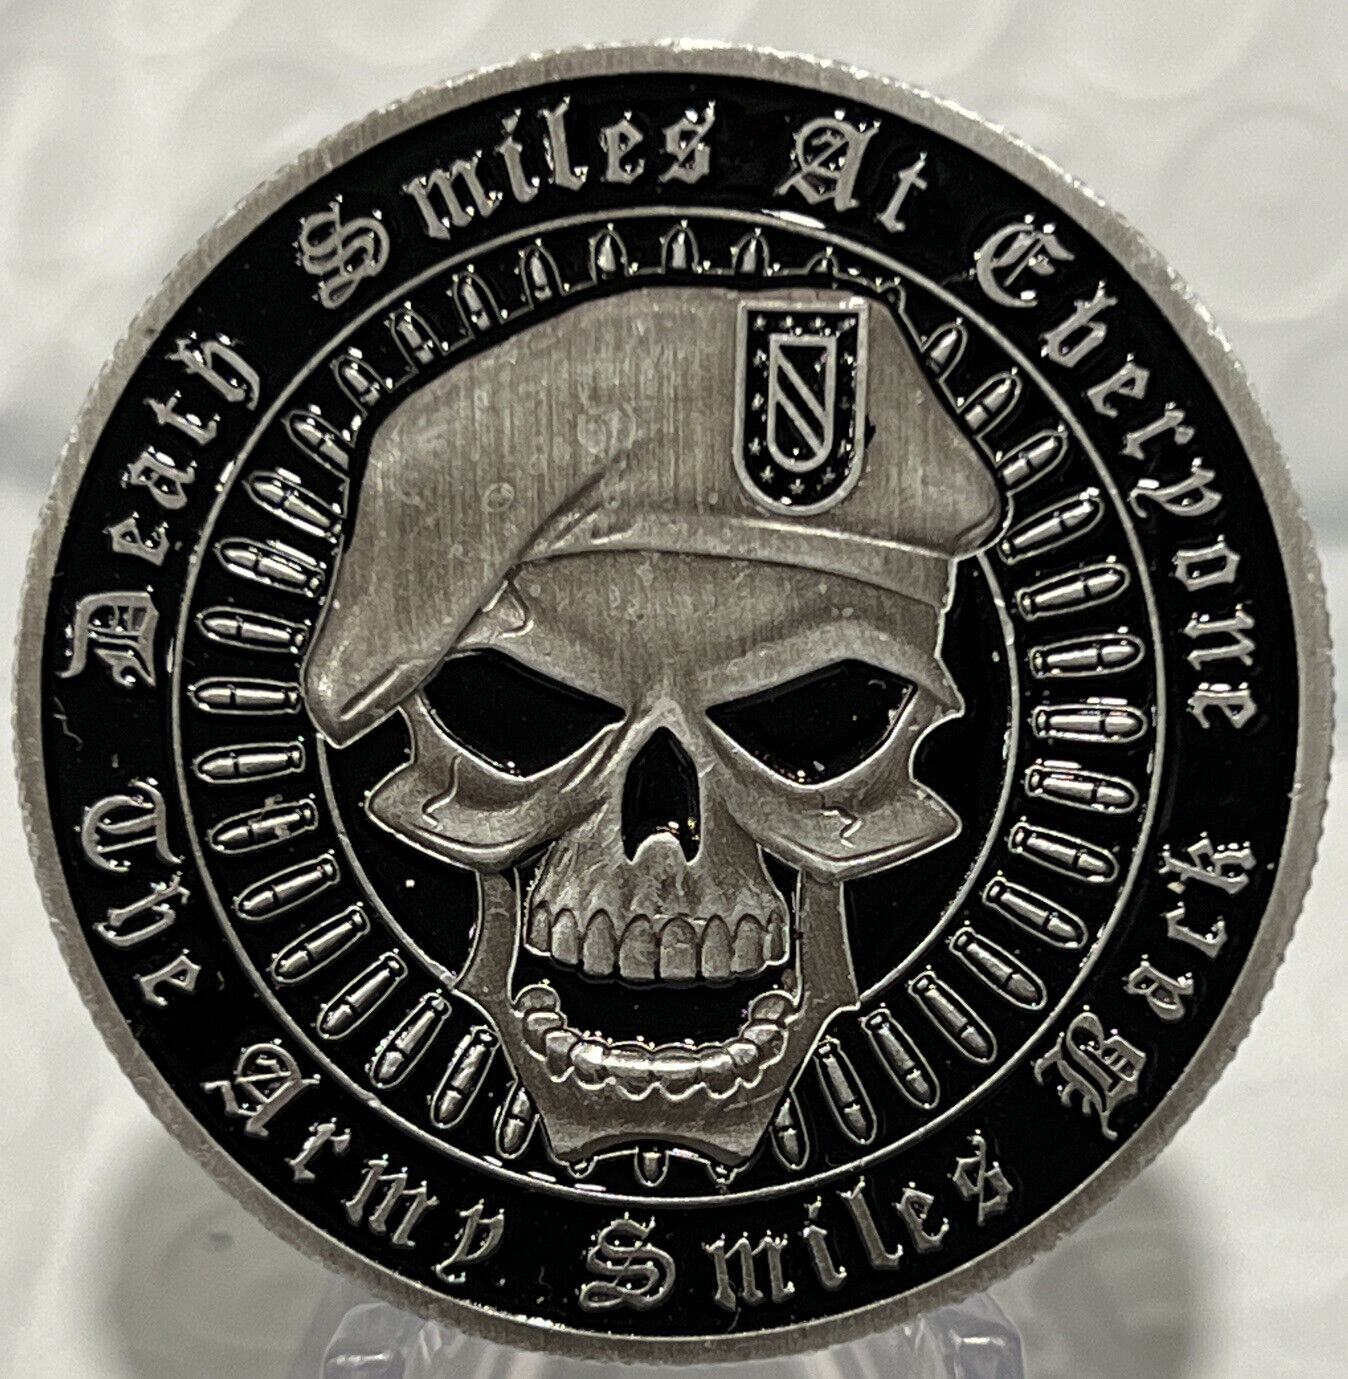 * US Army Challenge Coin Death Smiles at Everyone / The Army Smiles Back Coin